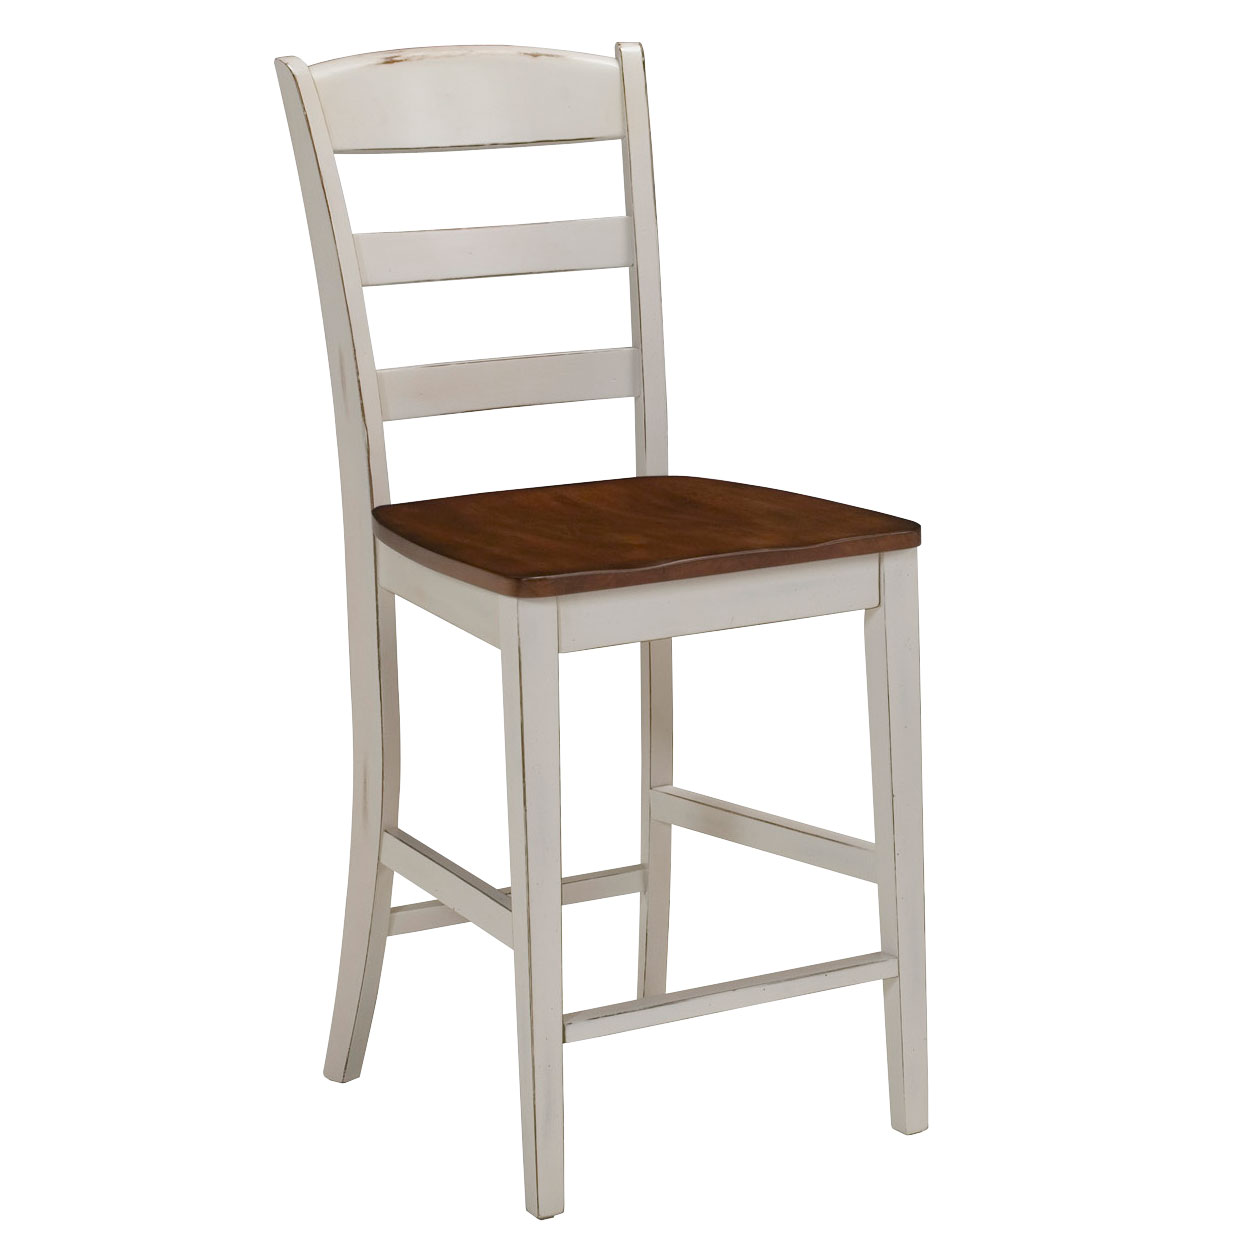 Antique White Finished Bar Stool with Distressed Oak Seat, ANTIQUE WHITE